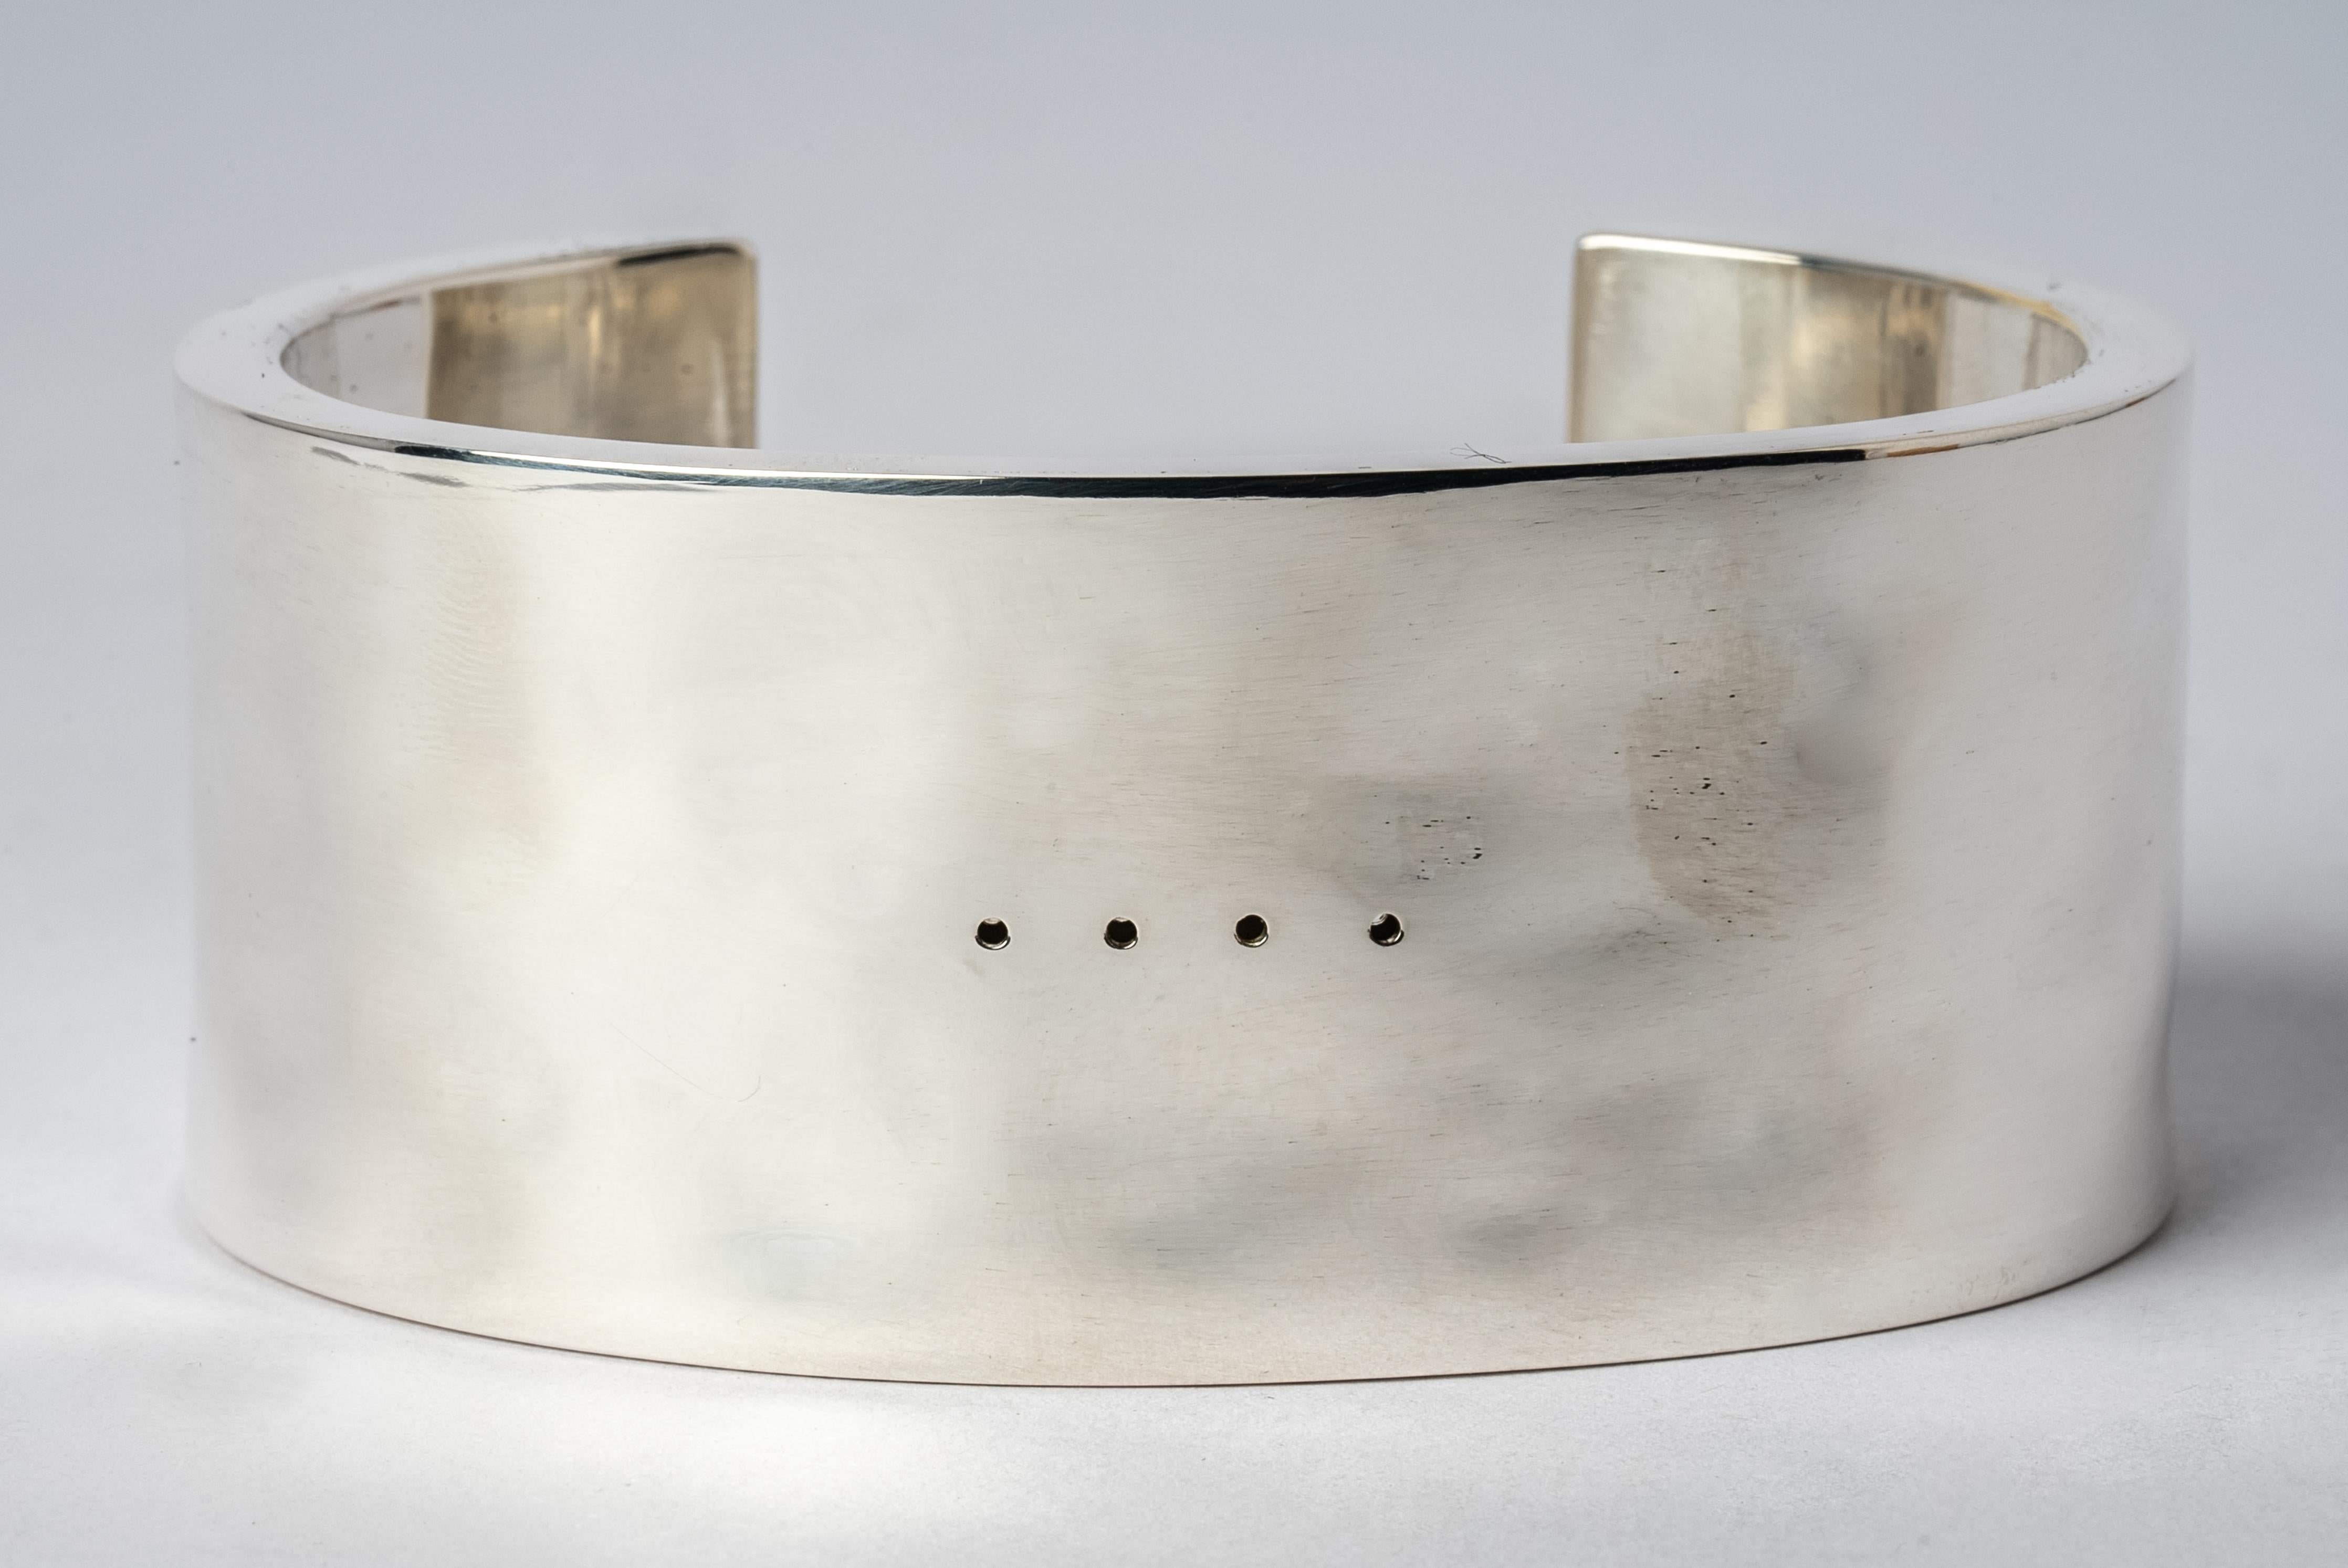 Bracelet in polished silver plated brass. This piece is 100% hand fabricated from metal plate; cut into sections and soldered together to make the hollow three dimensional form. If sterling silver, the sheet metal is made by hand. The silver is